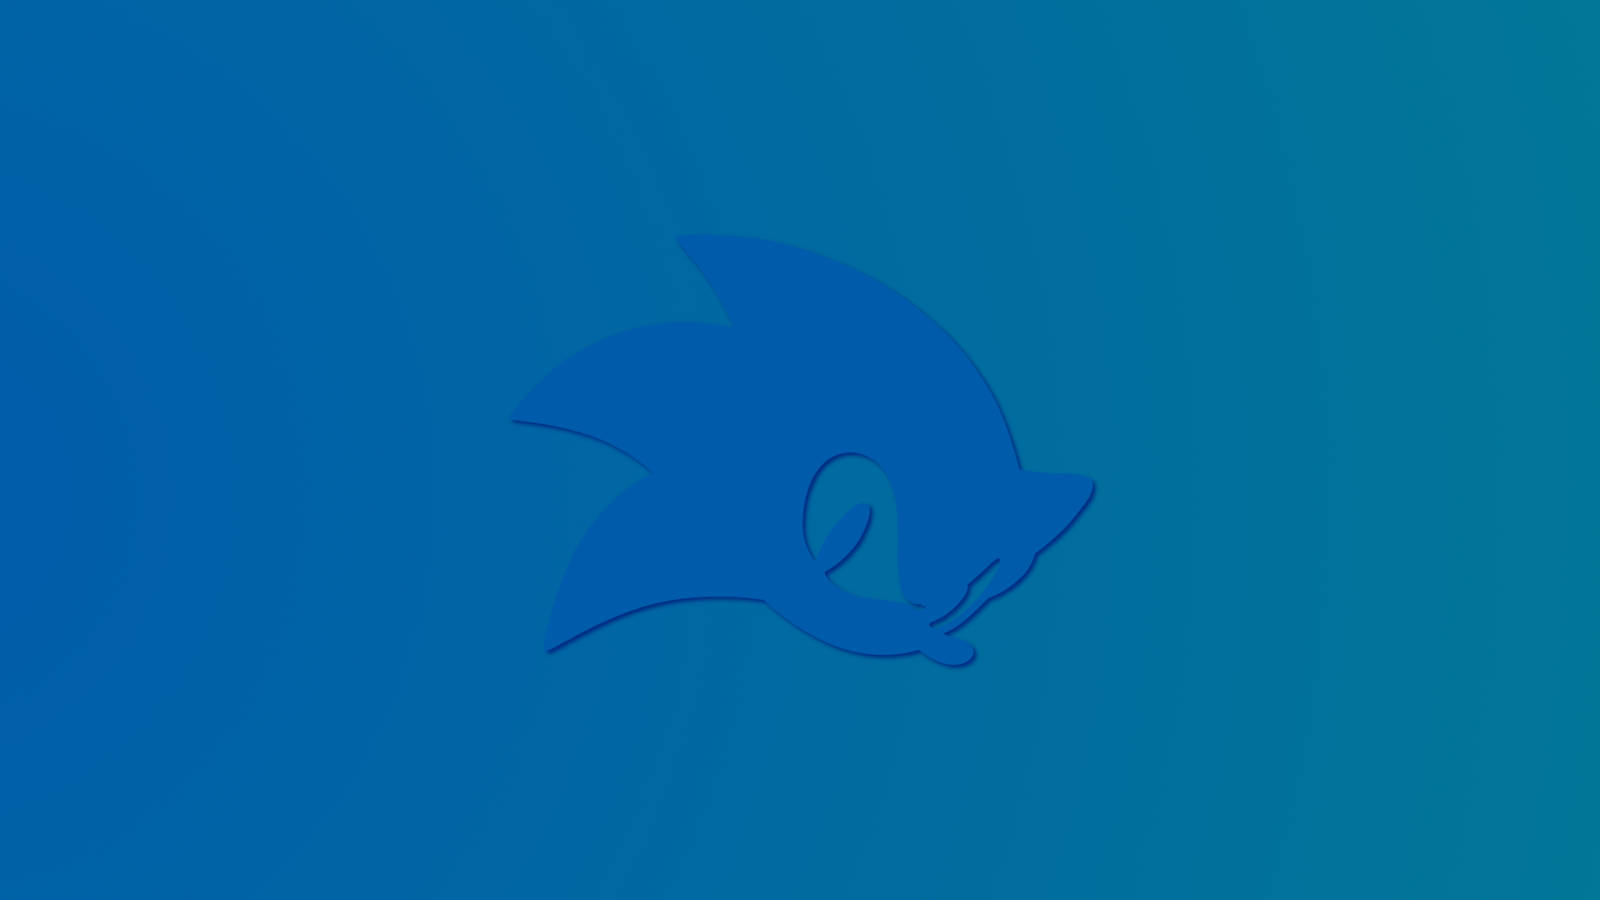 Speed Up Your Life with Blue Sonic. Wallpaper